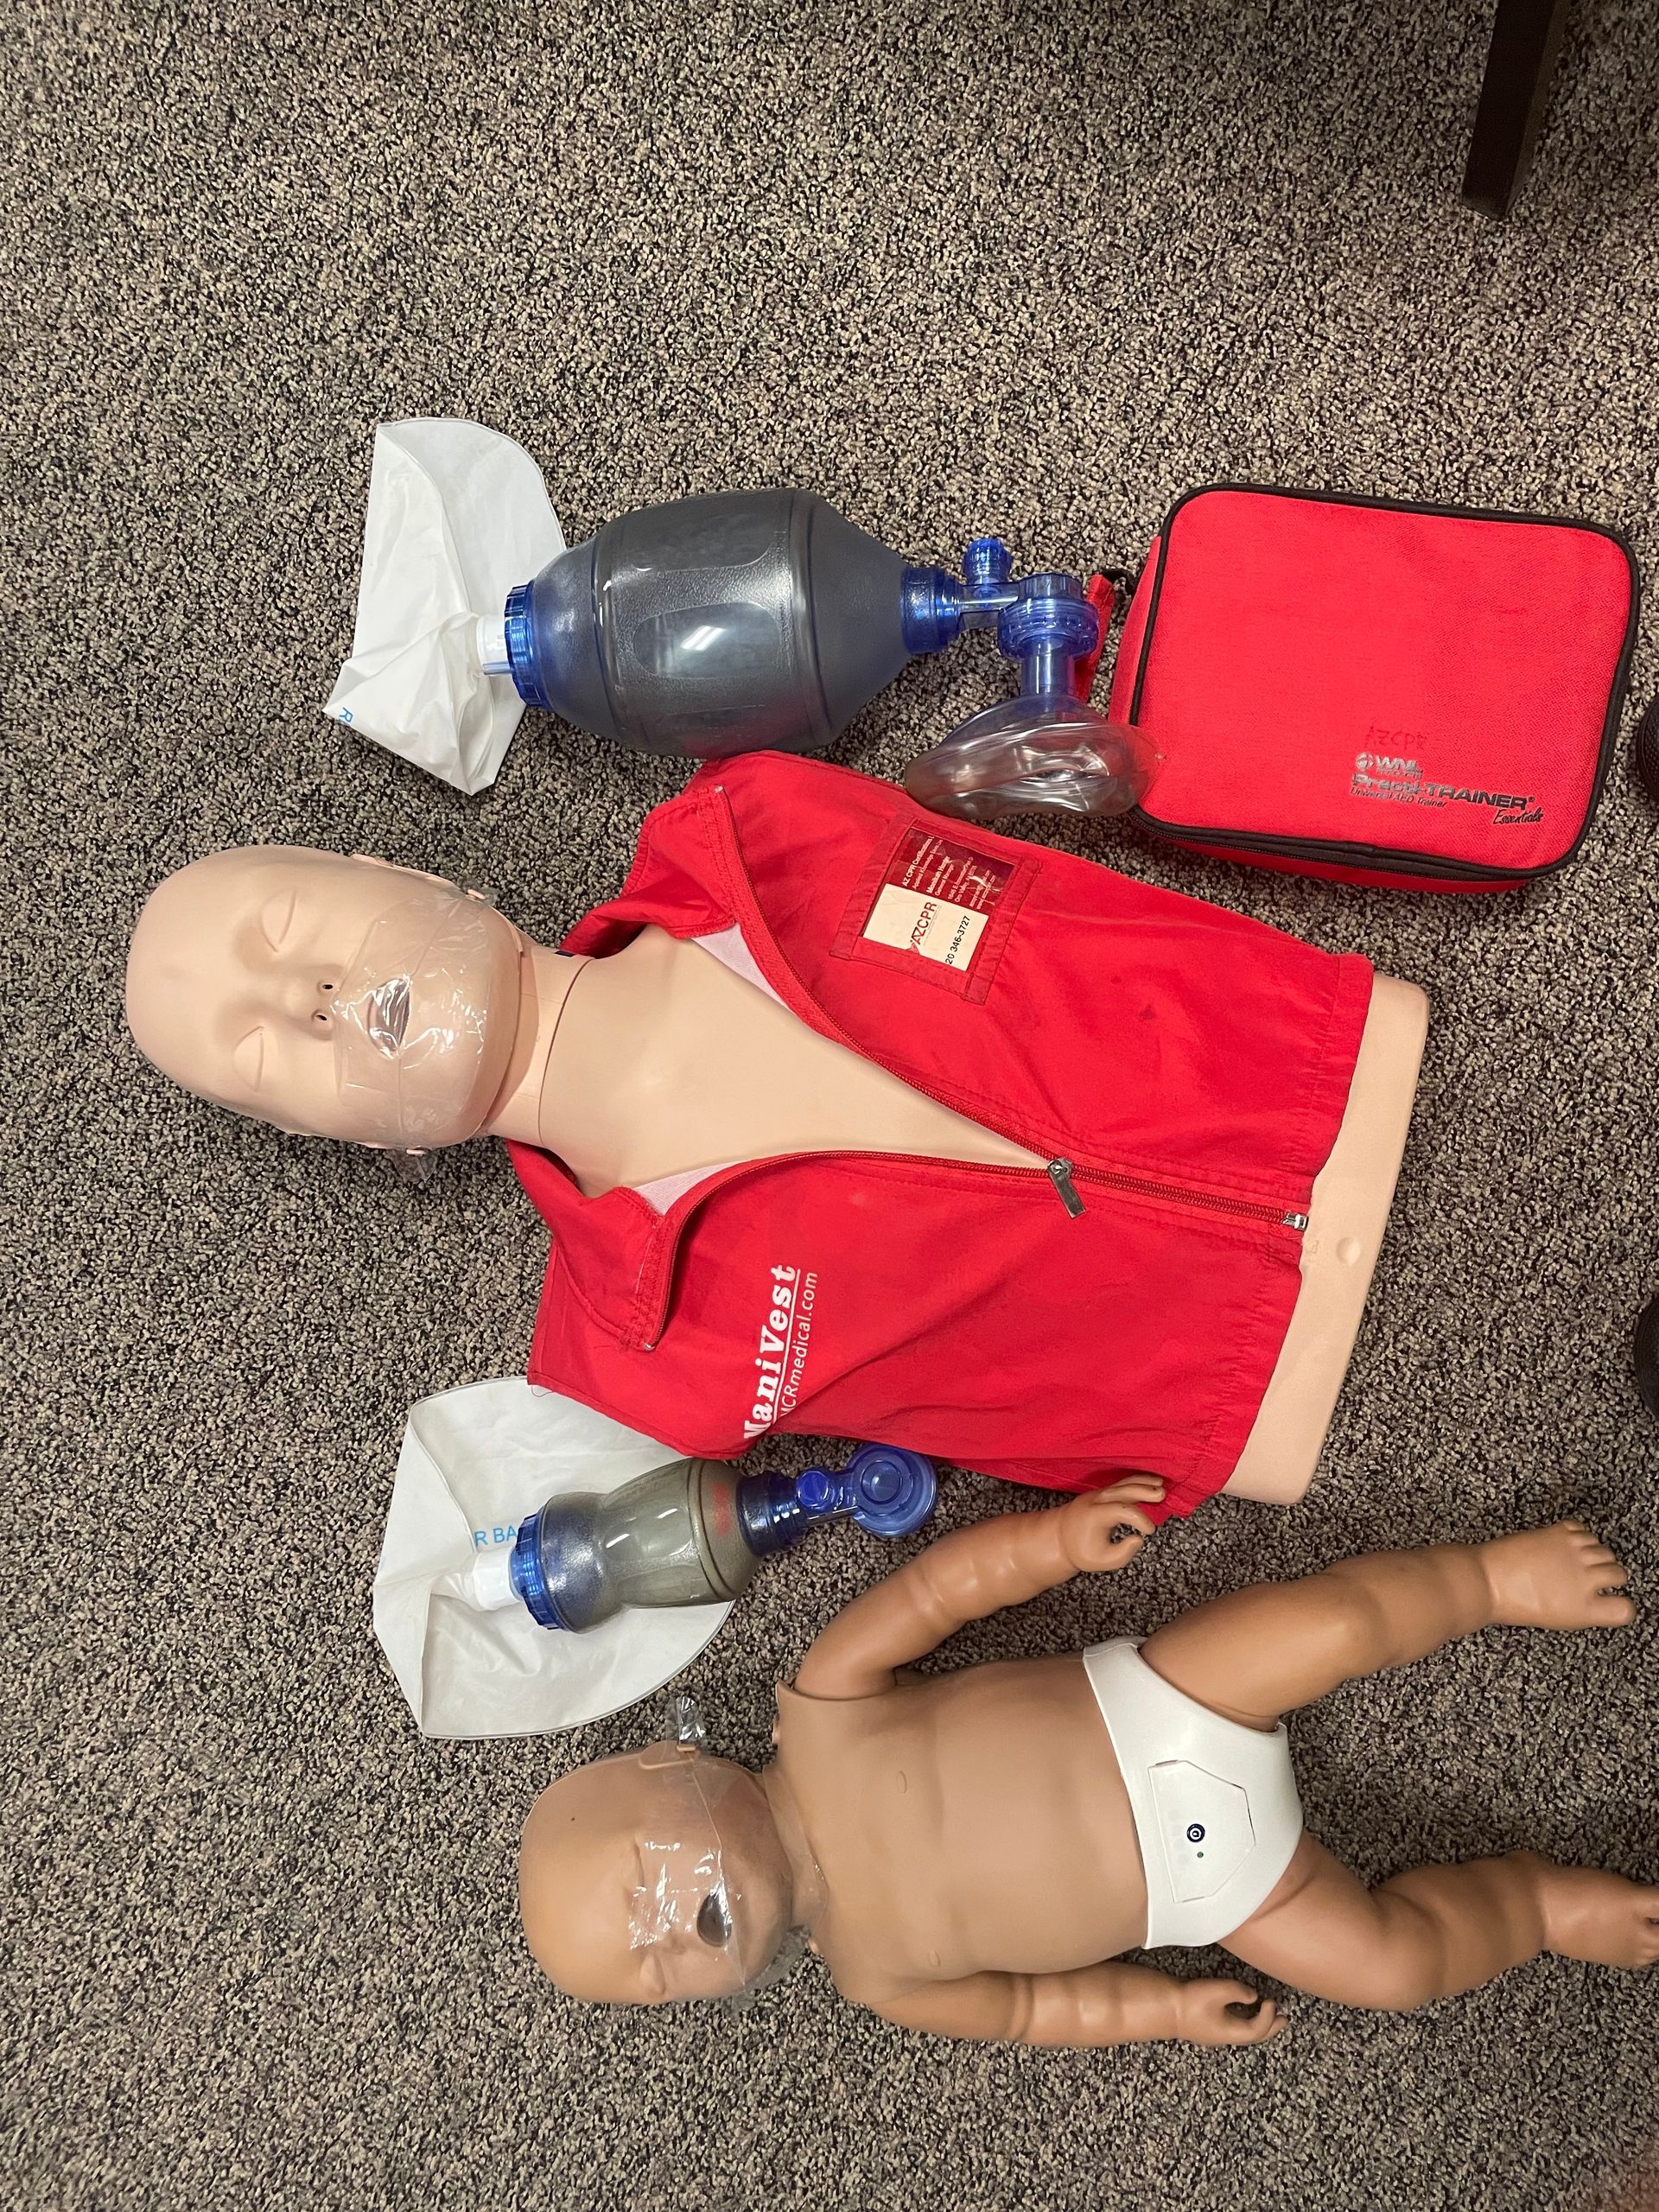 BLS-Certified Training